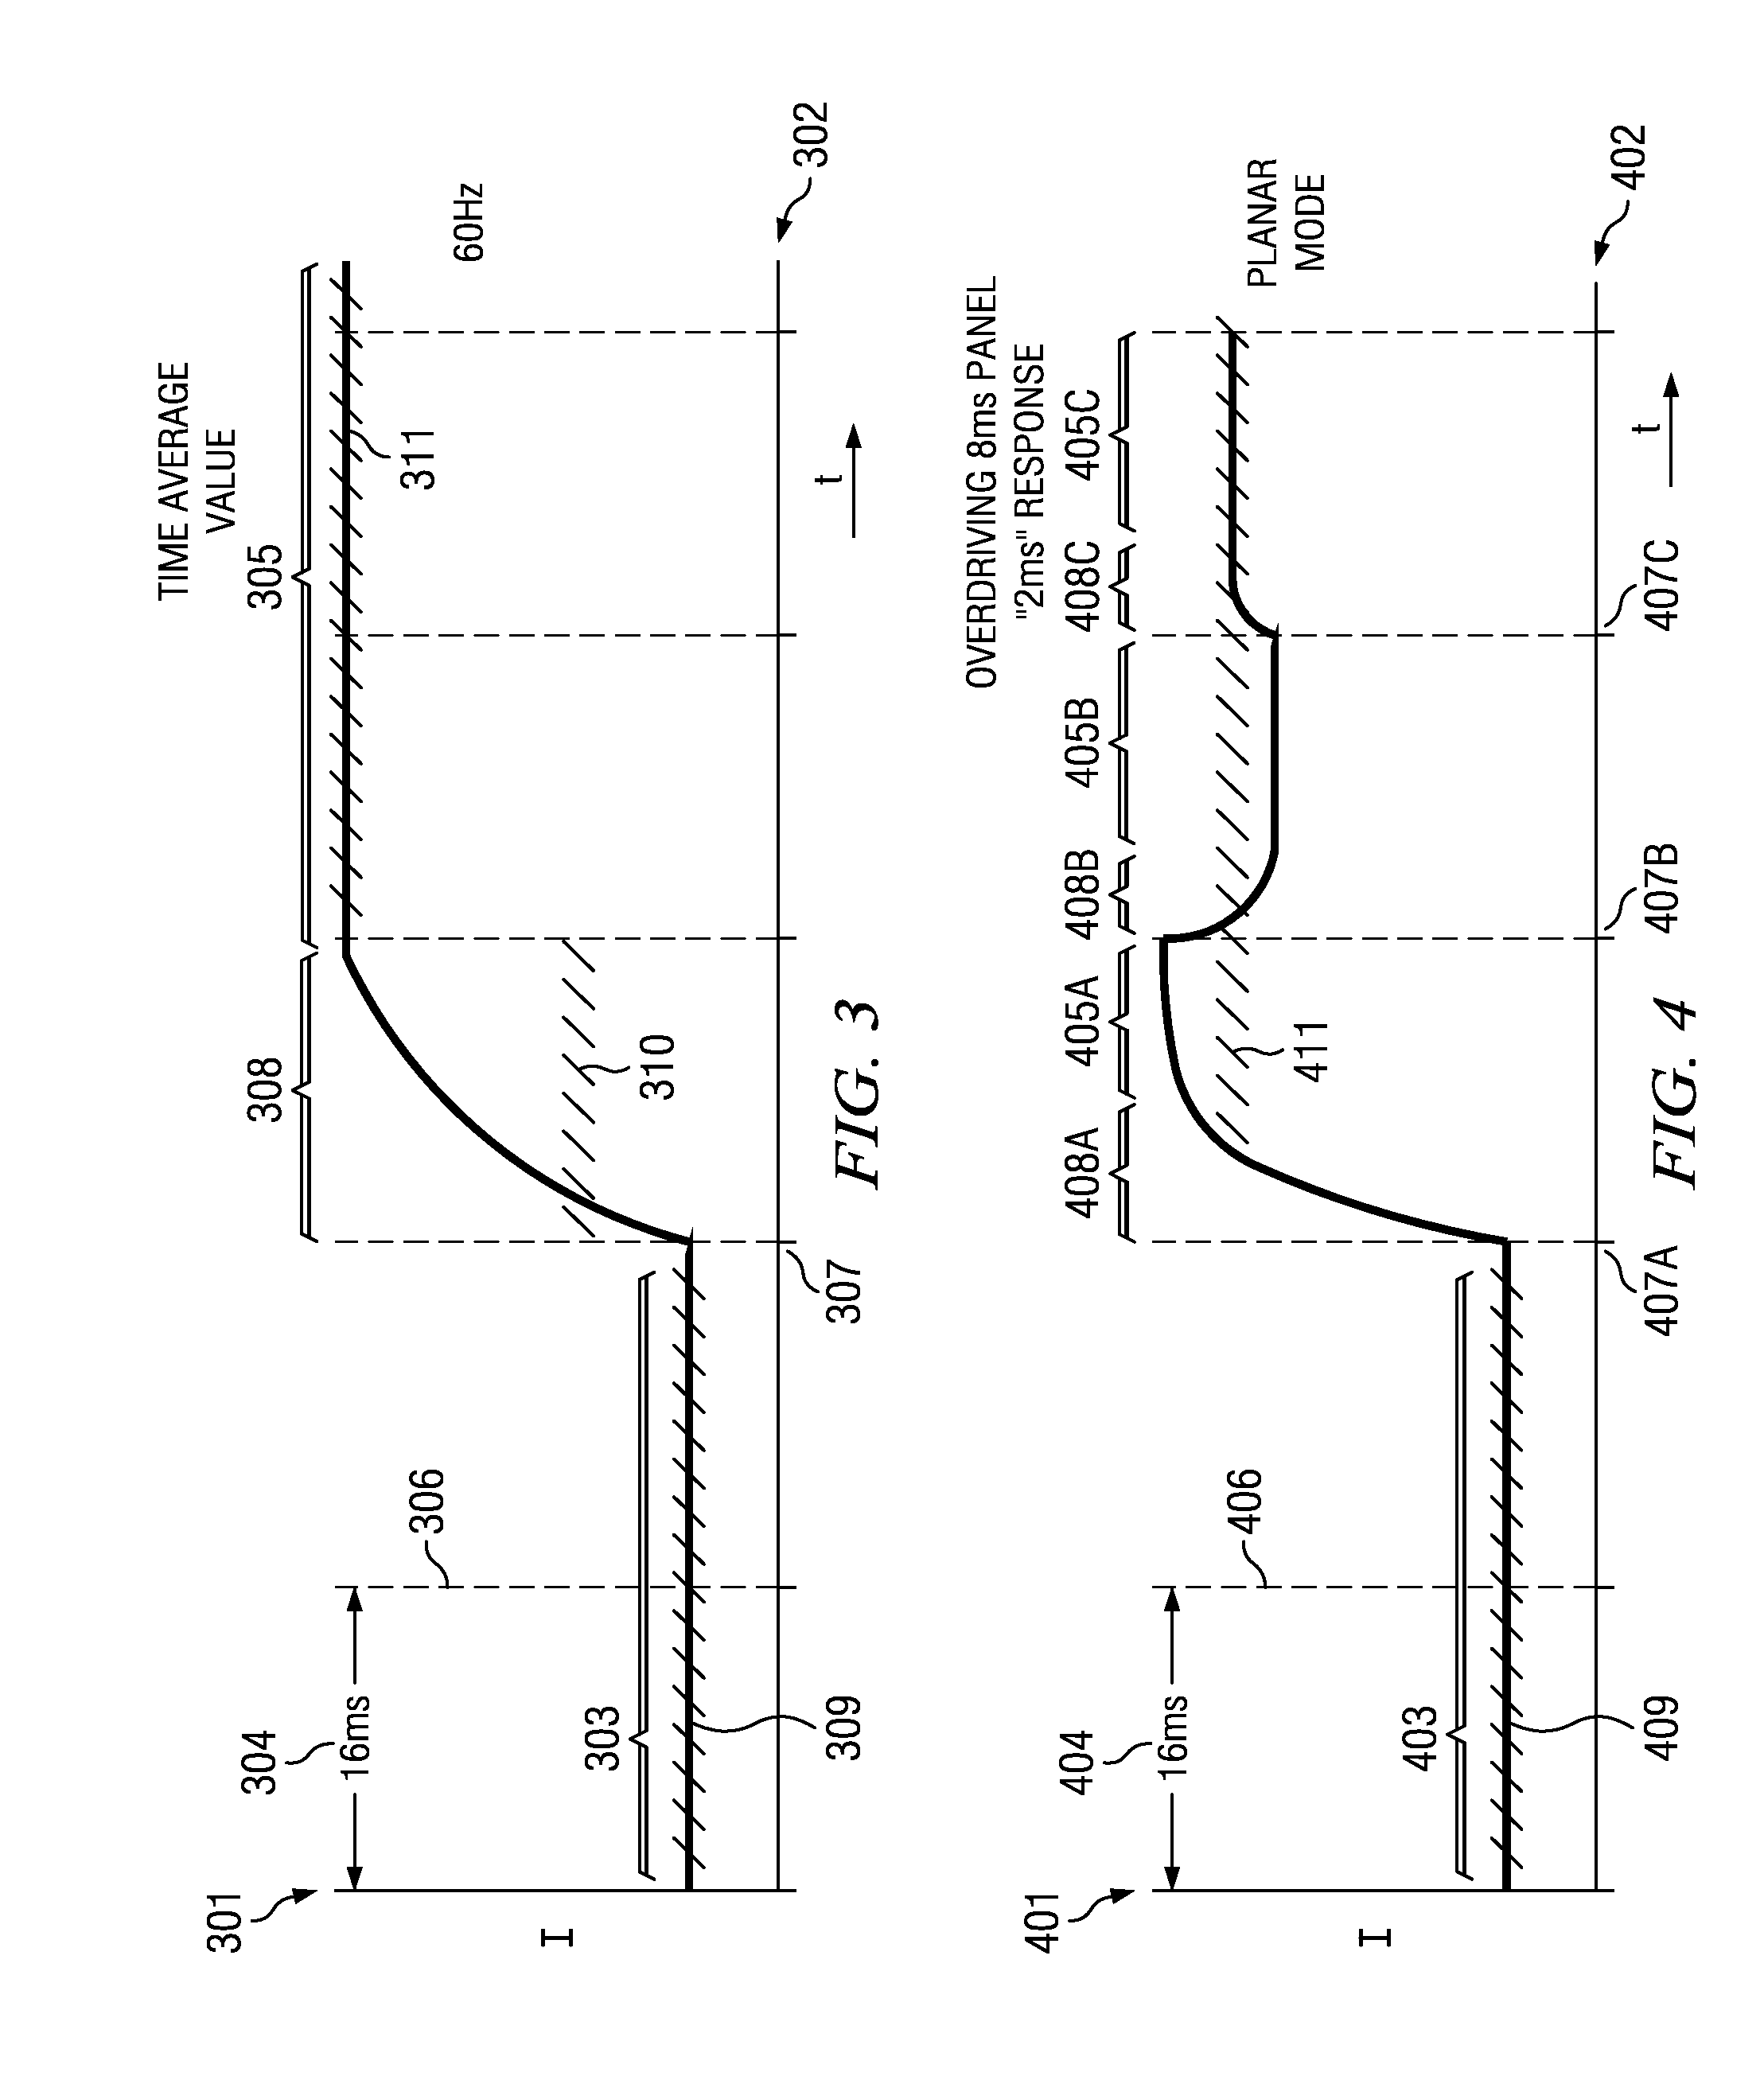 Stereoscopic flat panel display with synchronized backlight, polarization control panel, and liquid crystal display